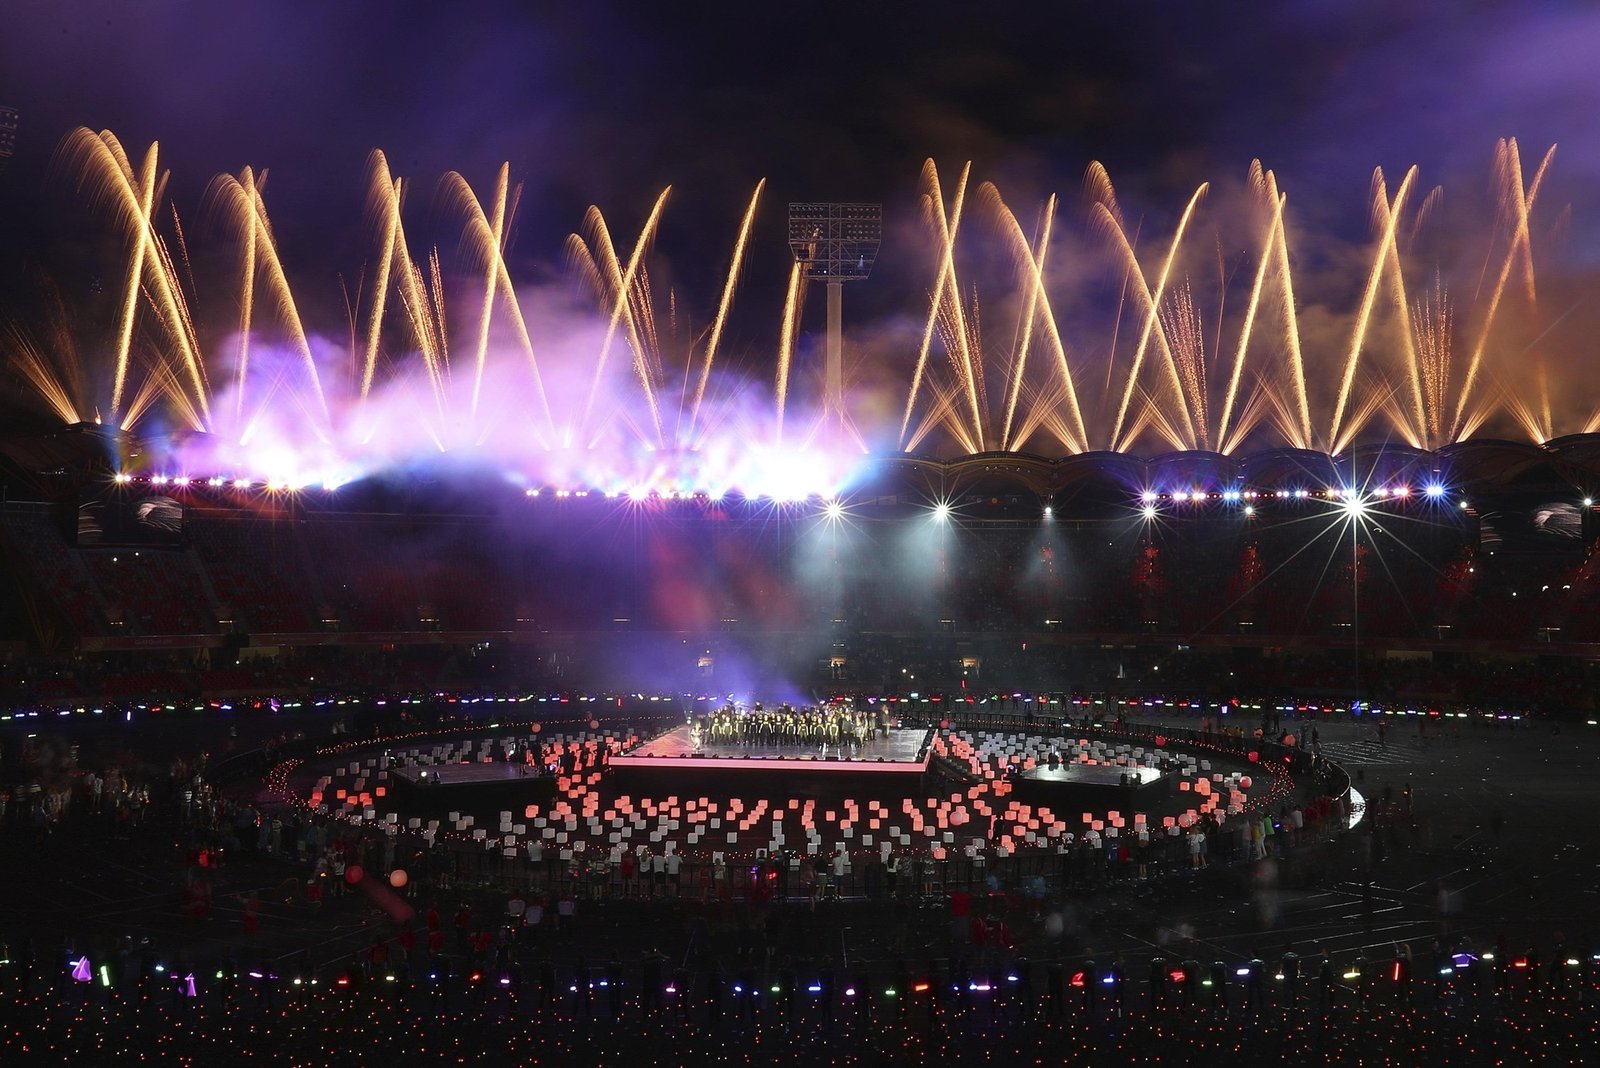 Malaysia declines hosting the Commonwealth Games 2026 citing cost concerns.